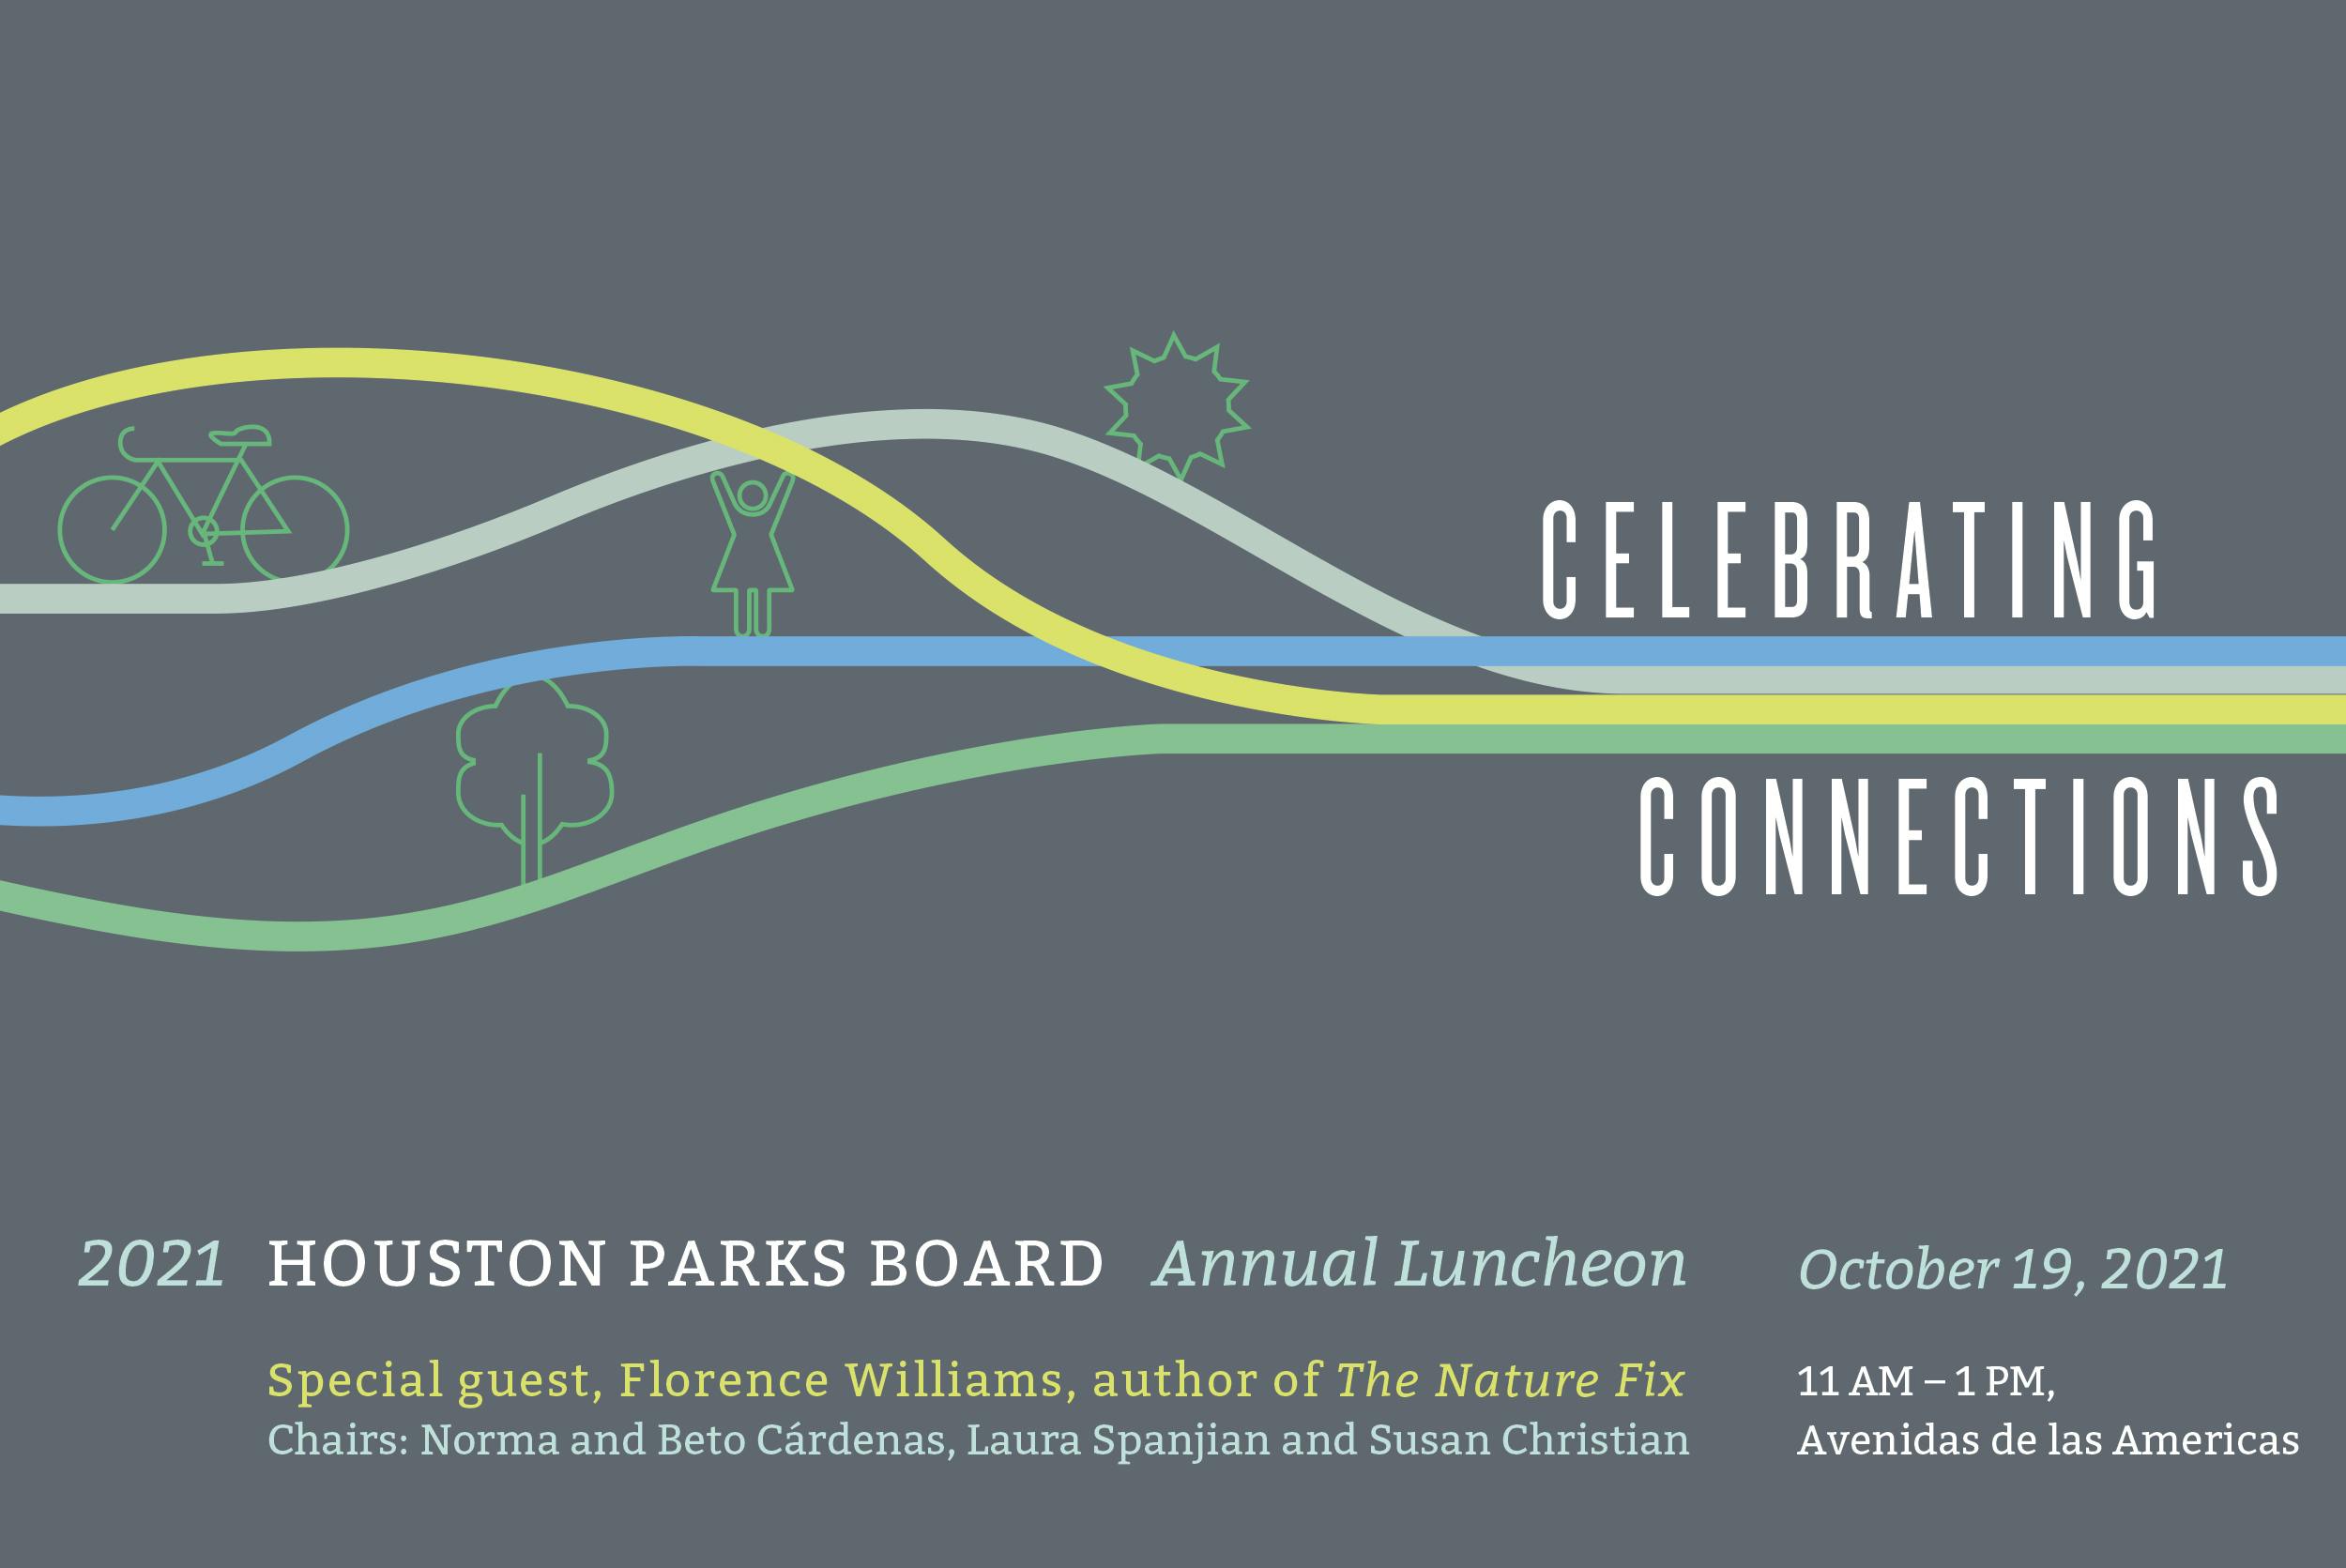 Houston Parks Board Events Calendar For Park Activities In Houston